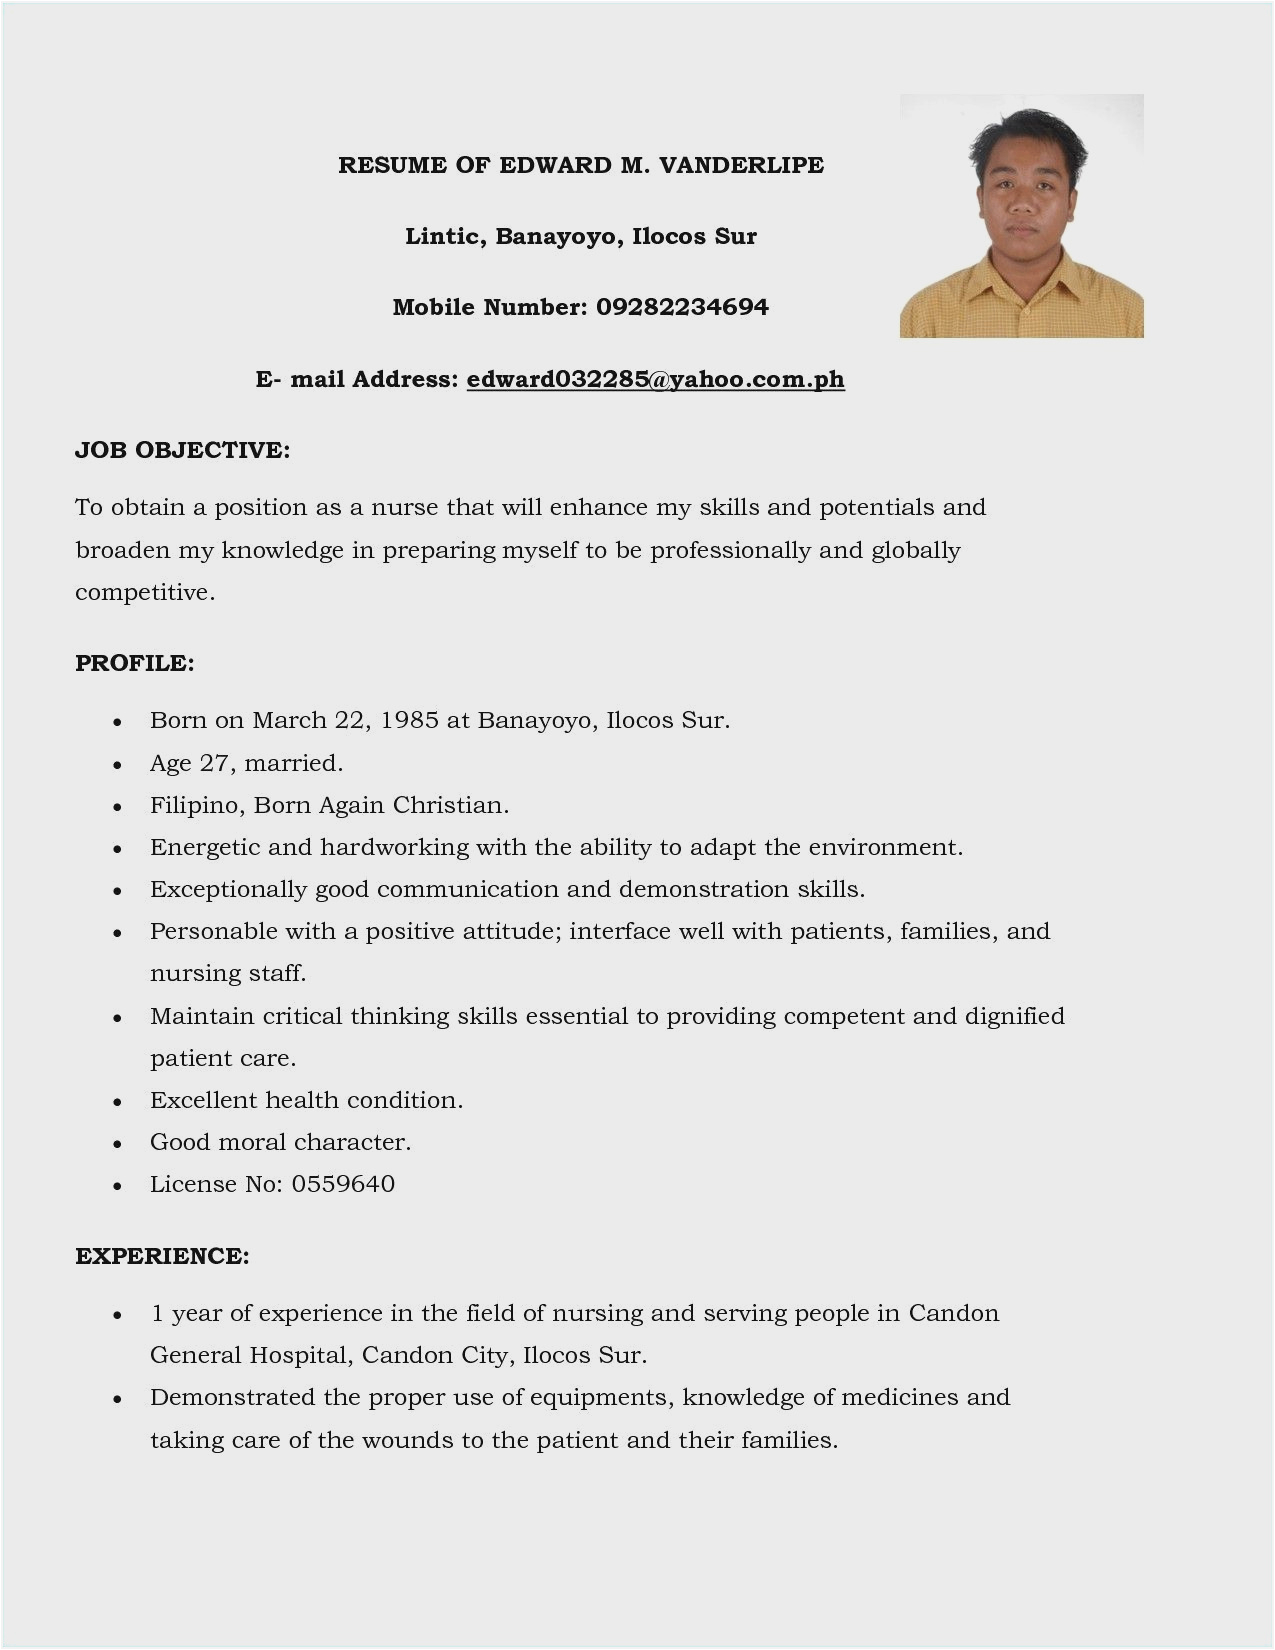 Sample Resume for Teaching Position Philippines Resume with Picture Philippines